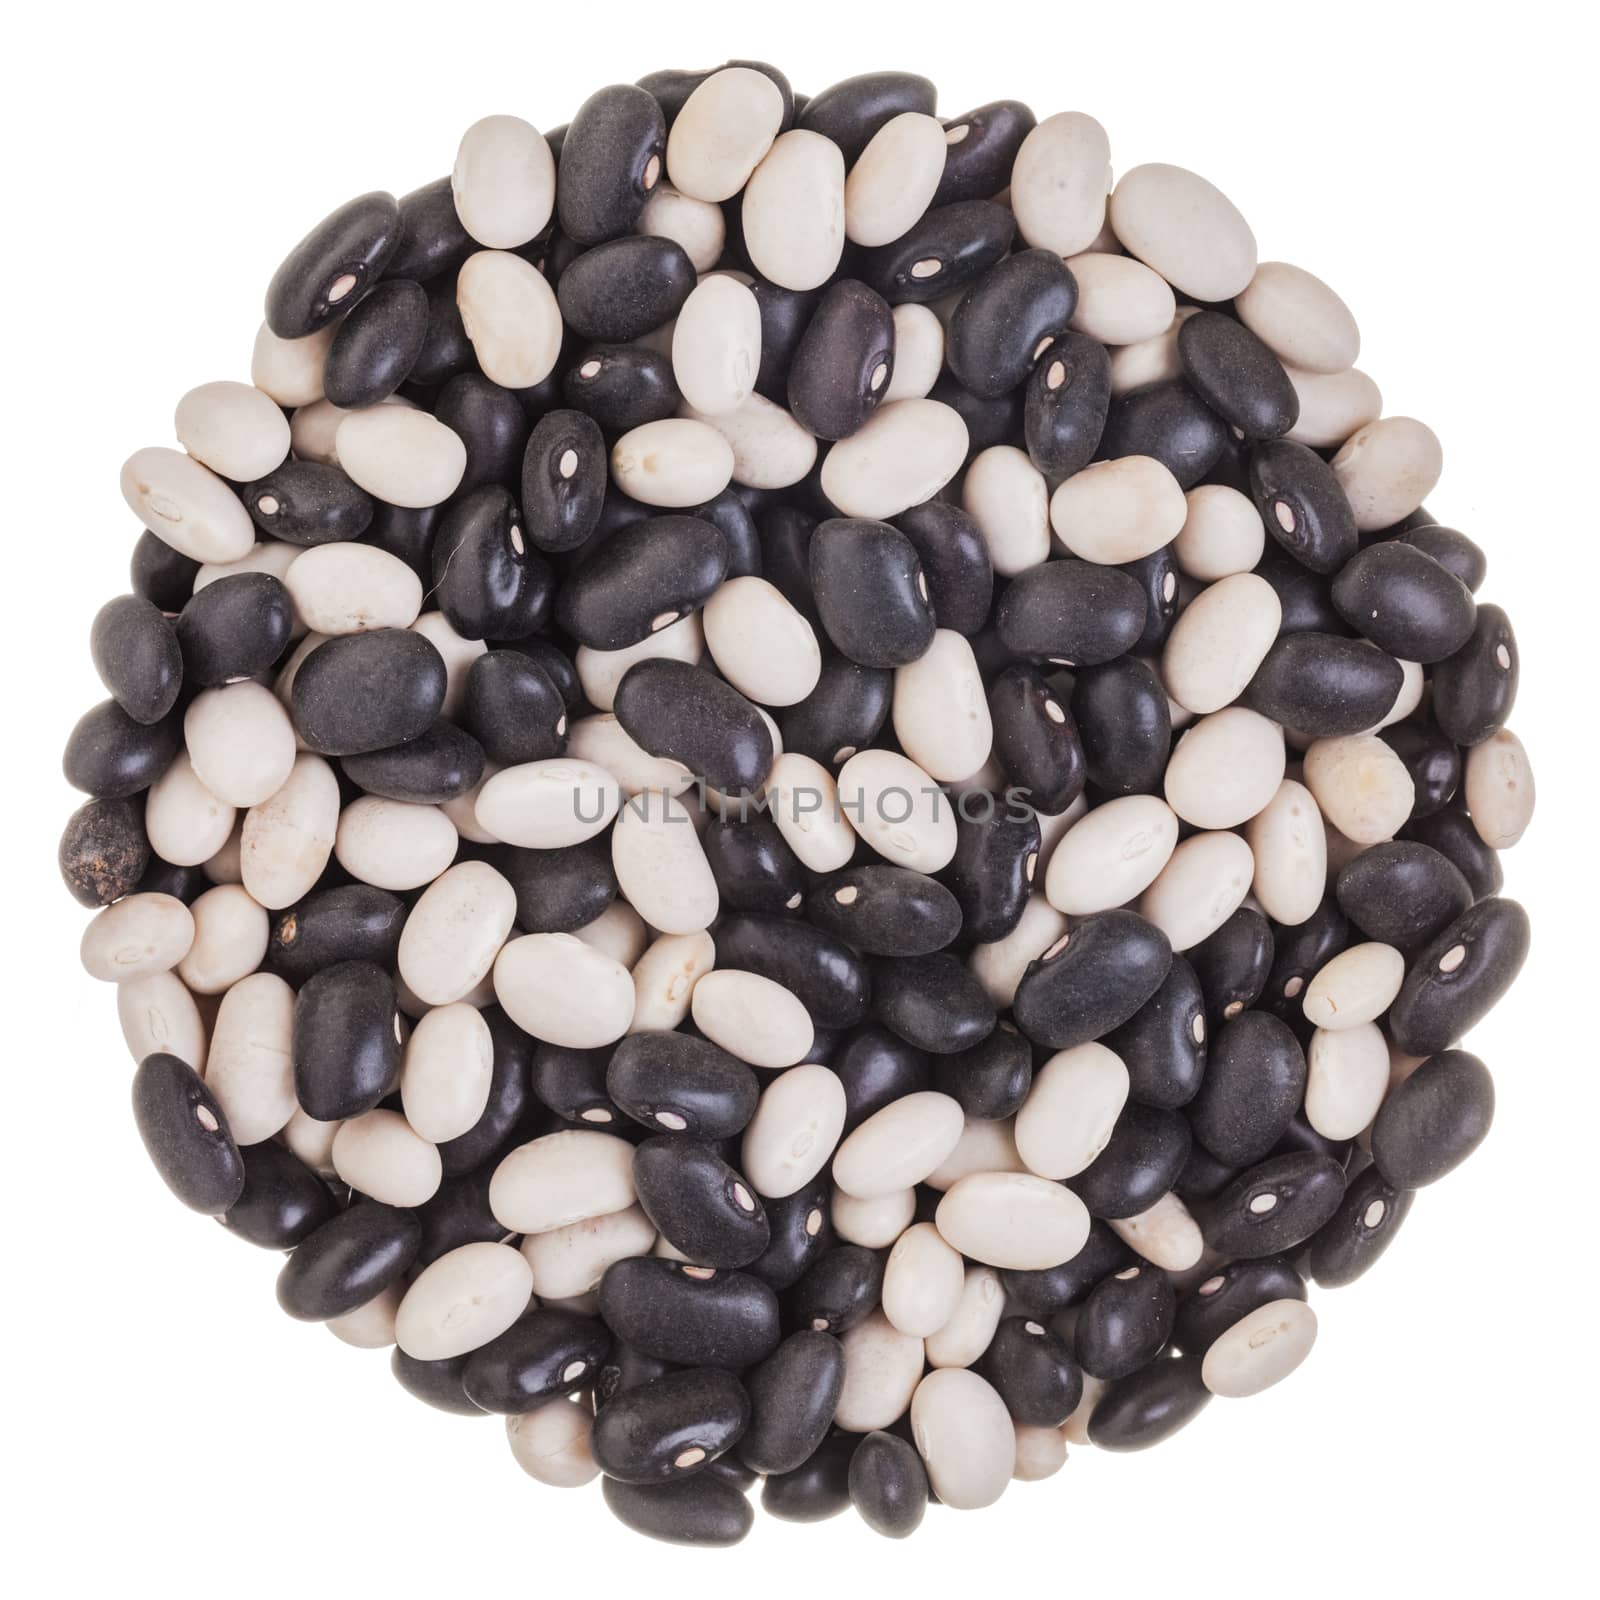 Circle Texture of Black and White Beans by aetb